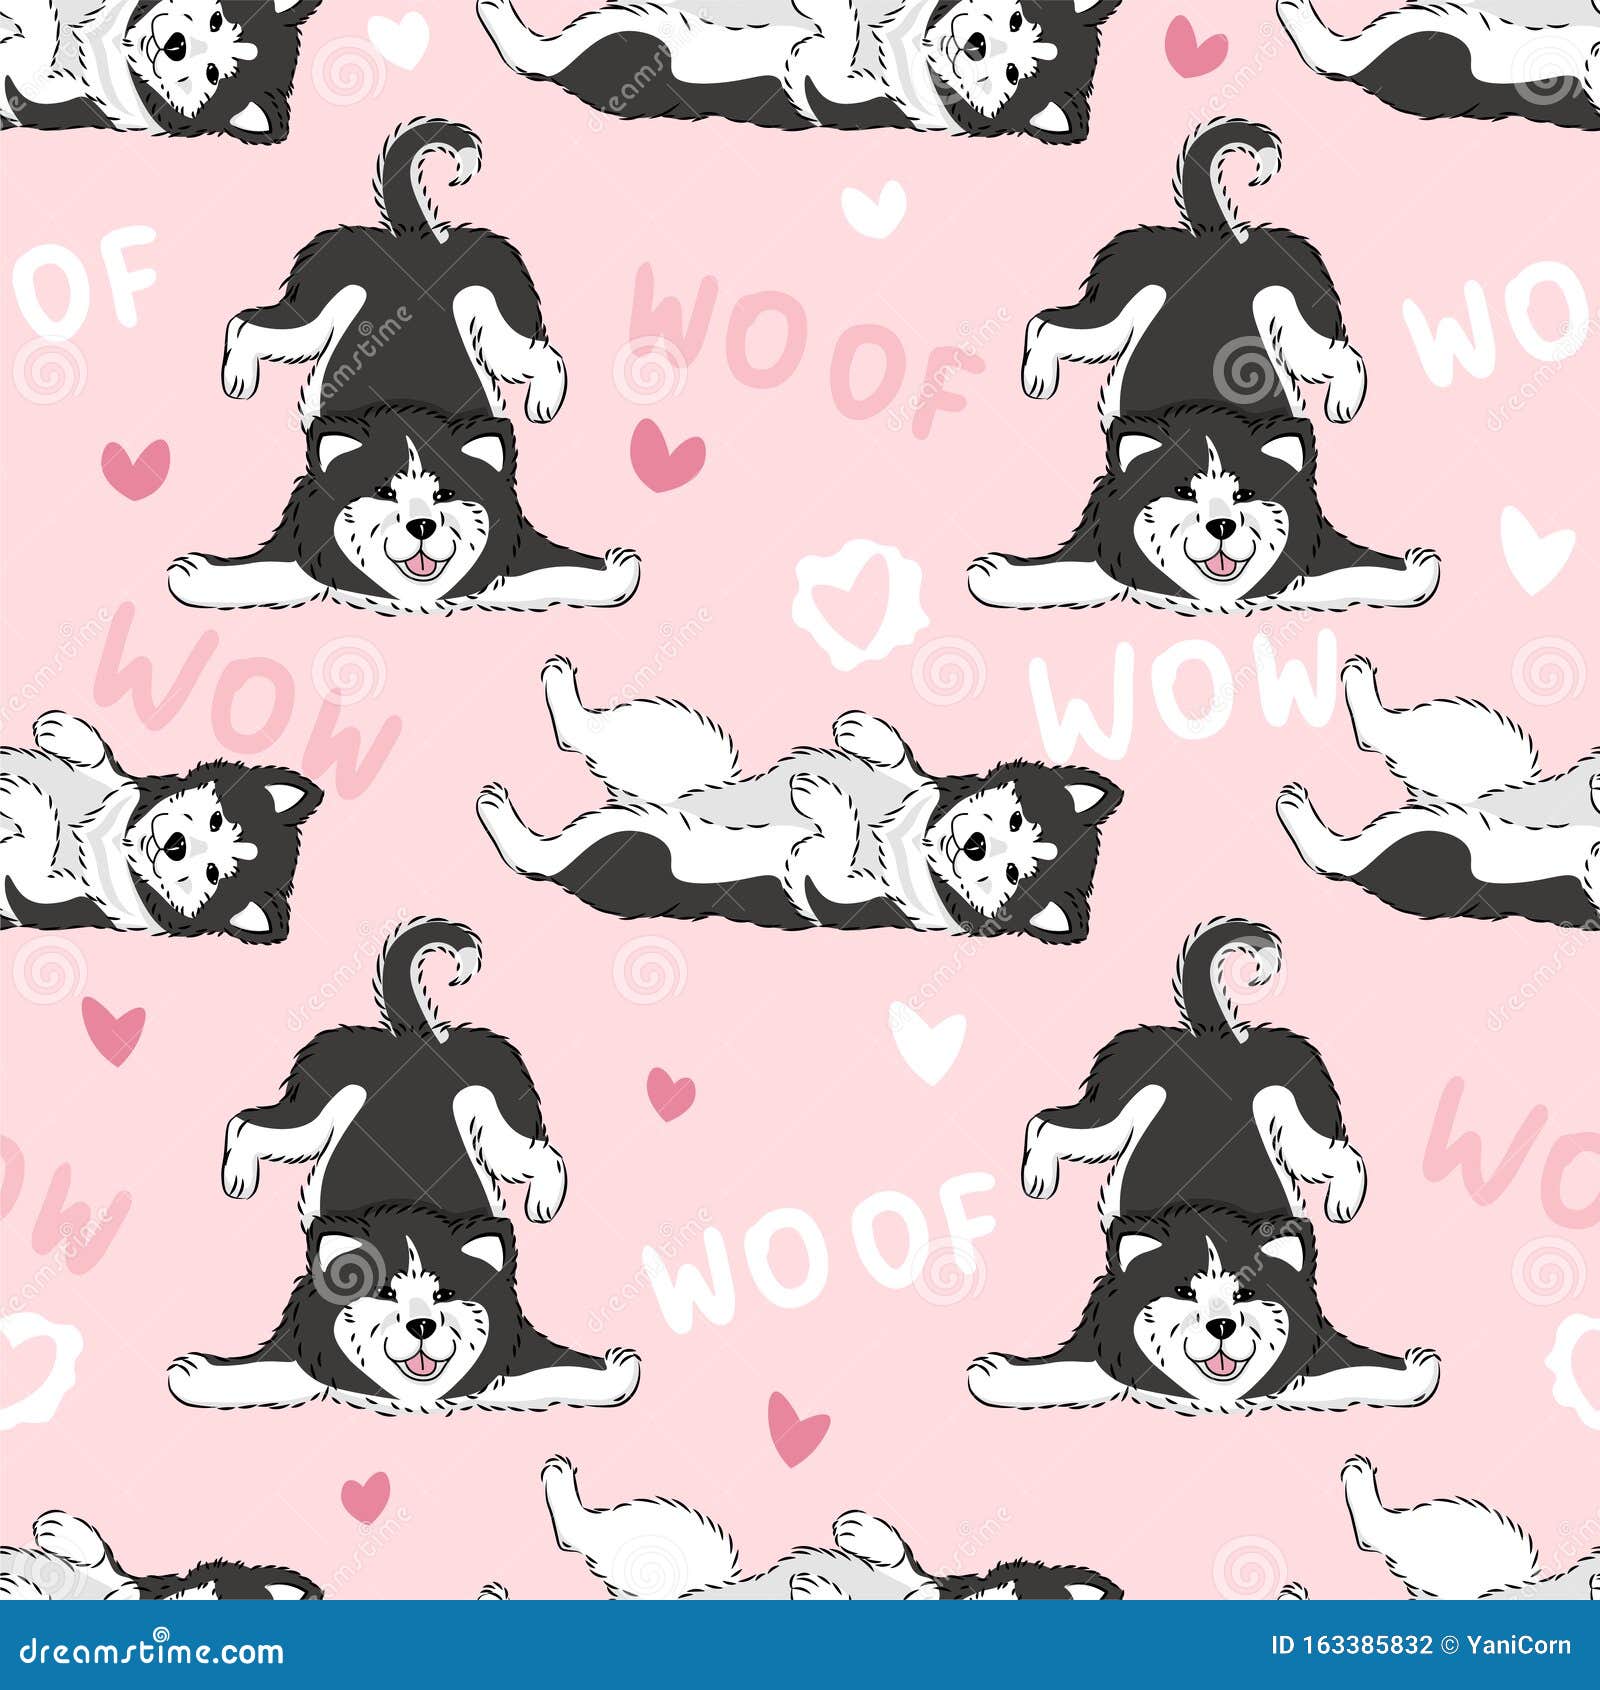 seamless pattern with cute cartoon drawing dogs husky or alaskan malamute, funny adorable pets, on pink background with hearts,